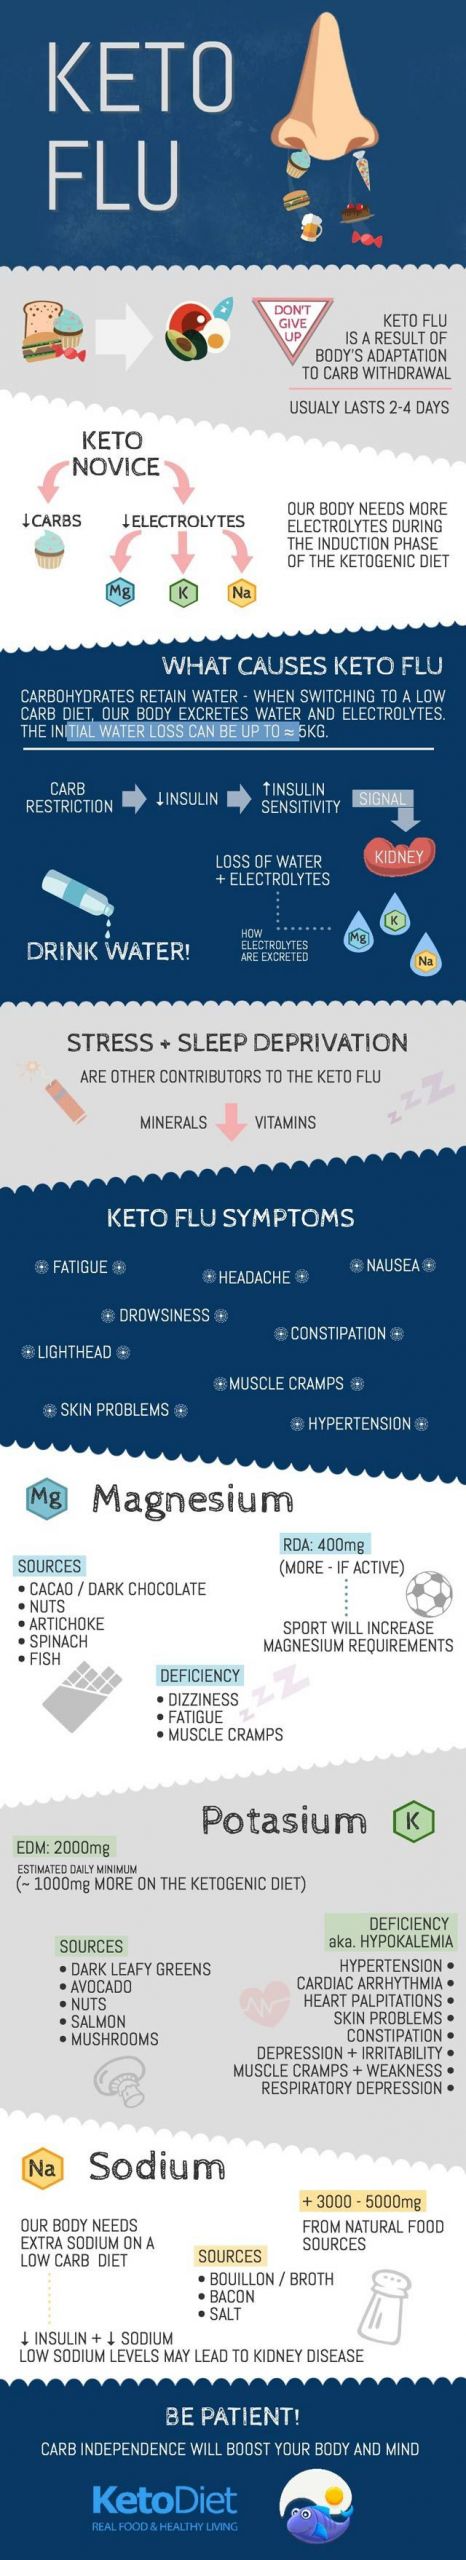 Keto Diet Flu
 “Keto flu” is very mon state during induction phase of